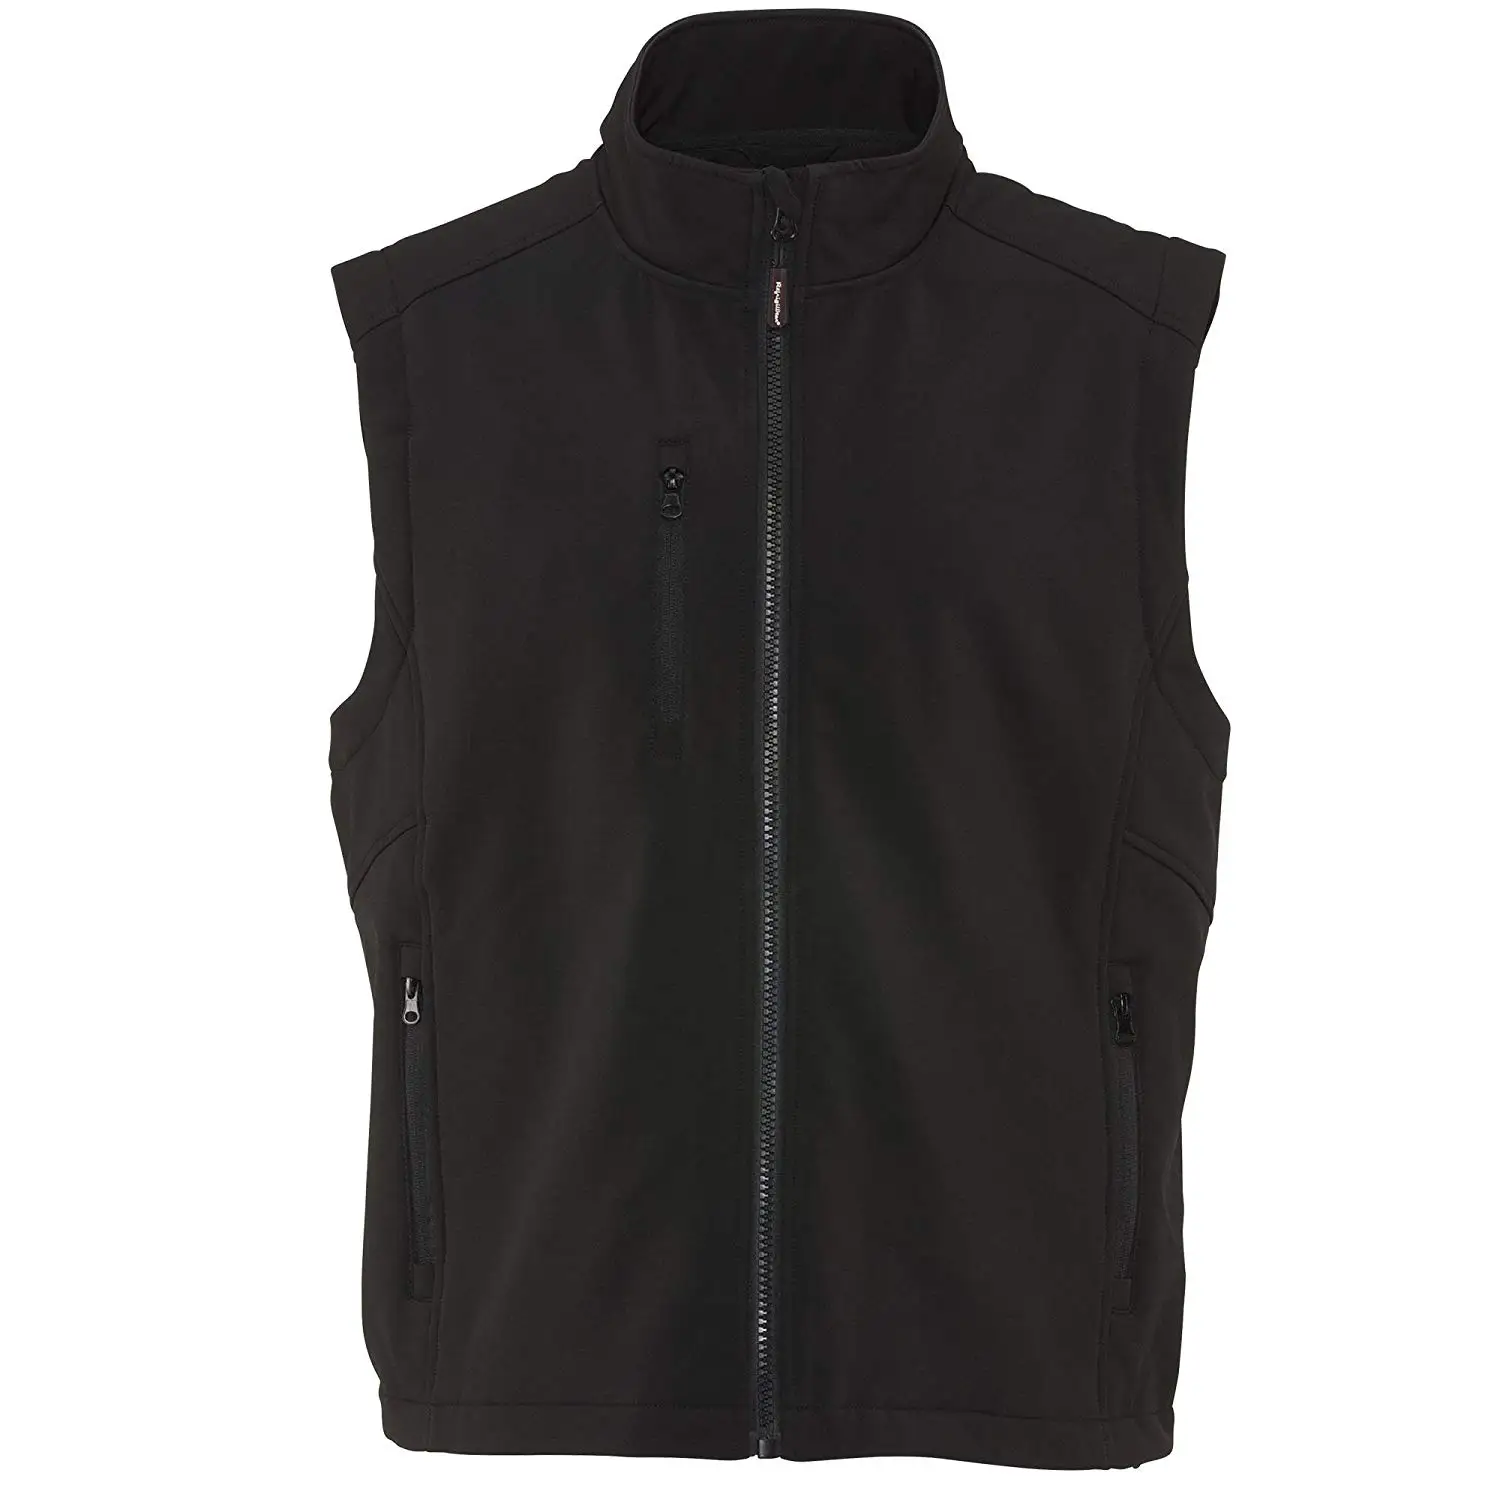 Cheap Softshell Vest, find Softshell Vest deals on line at Alibaba.com